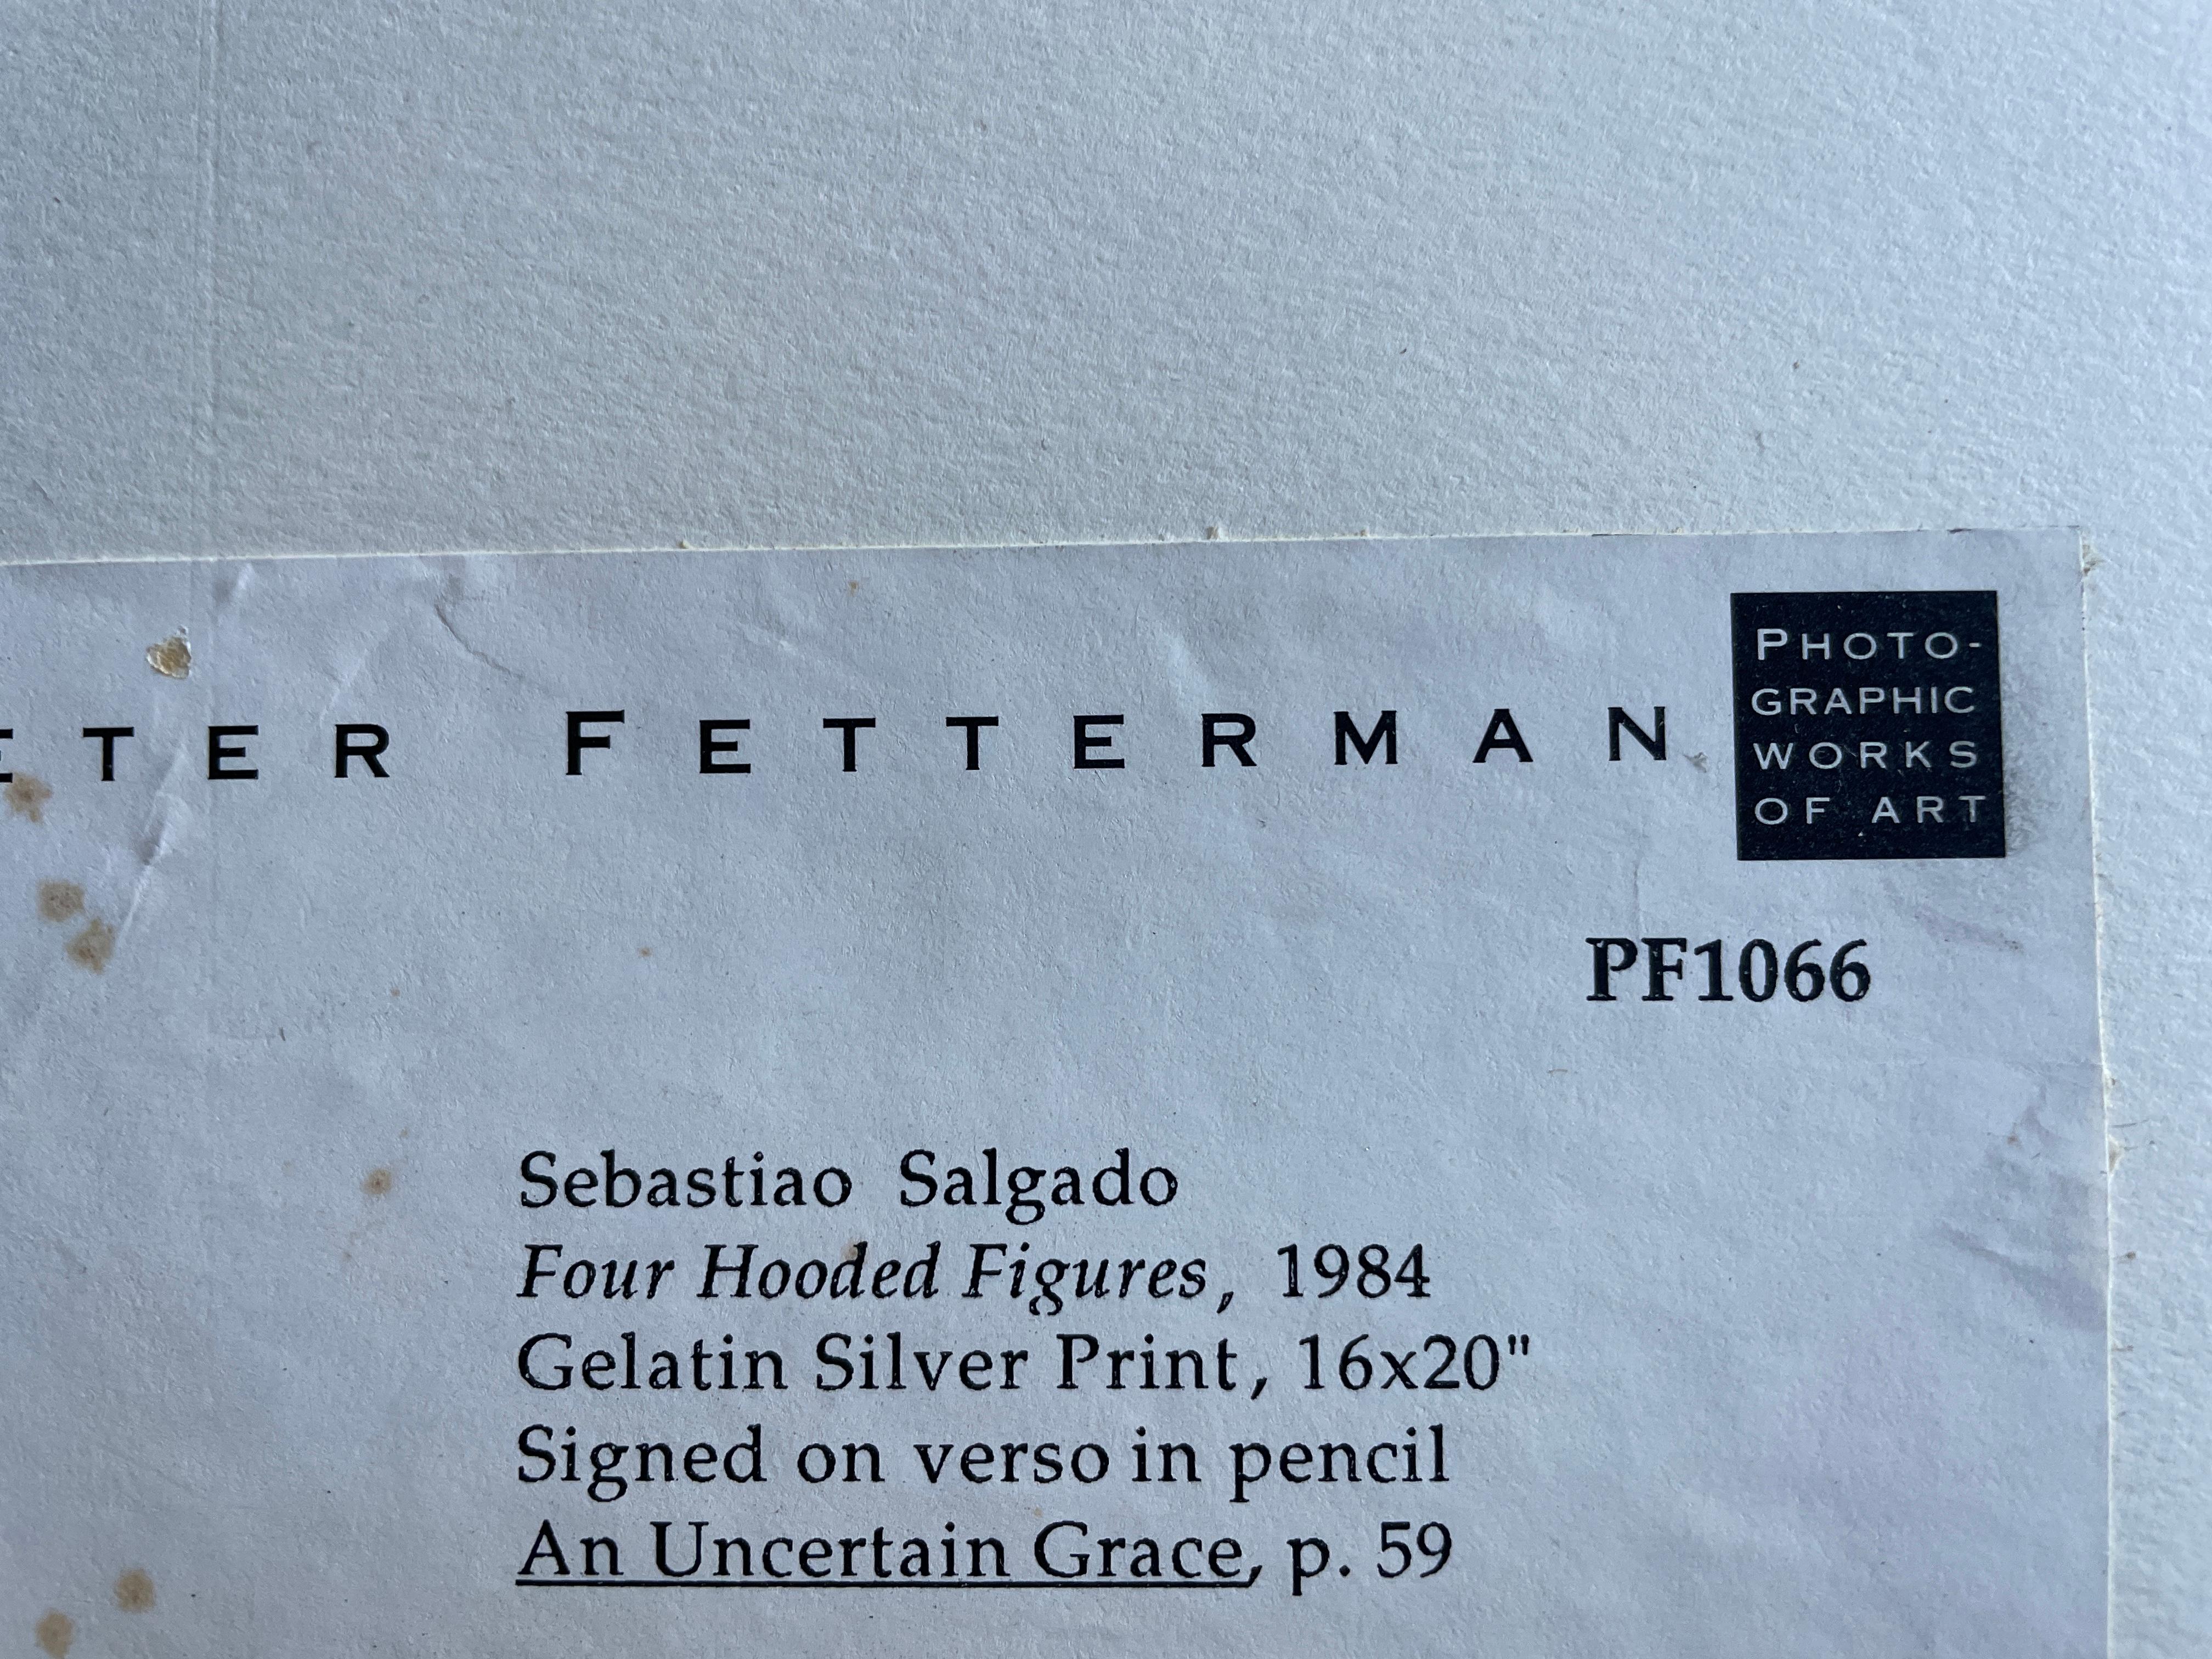 Purchased from Peter Fetterman Gallery - Authorized dealer of Salgado's work.
No damage issues.  Look print moutned on corners. Over Mat included.